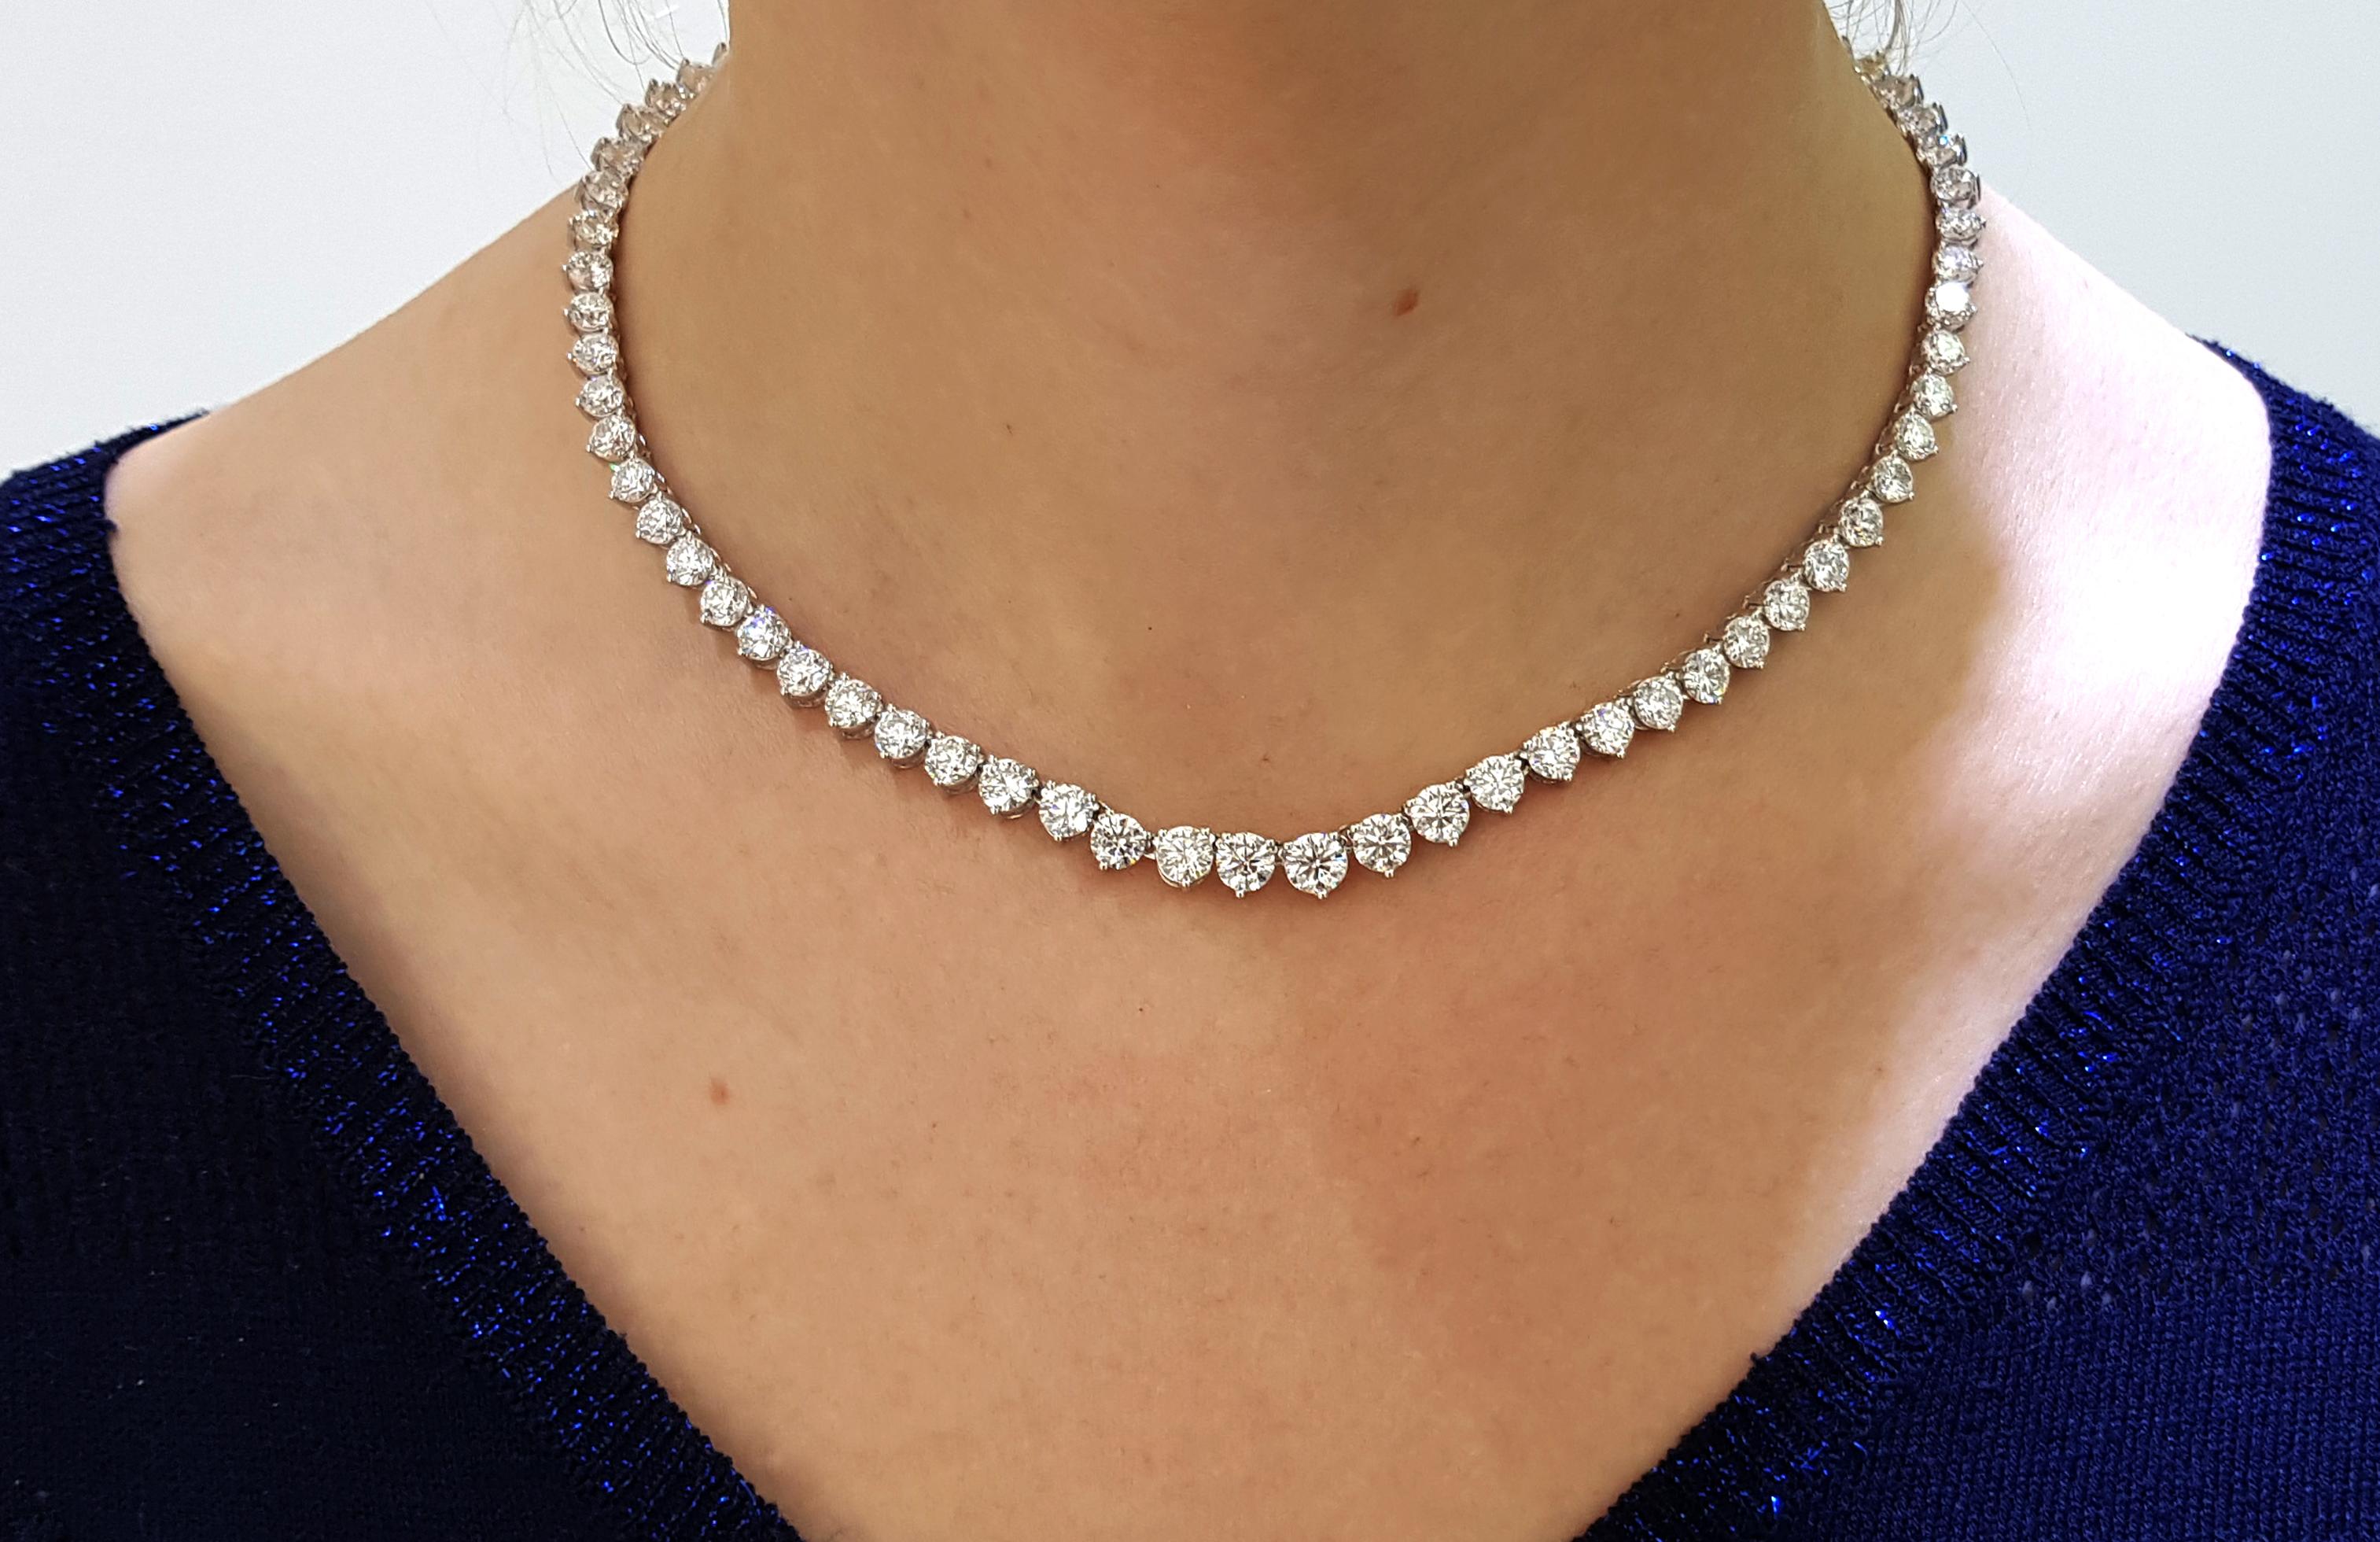 This stunning and impressive Riviera Necklace features a substantial Diamond weight of 30.00 Carats in beautifully graduated Round Brilliant Cut gems with a sparkly white color G/H clarity SI1. Each stone has a three-claw setting with an open